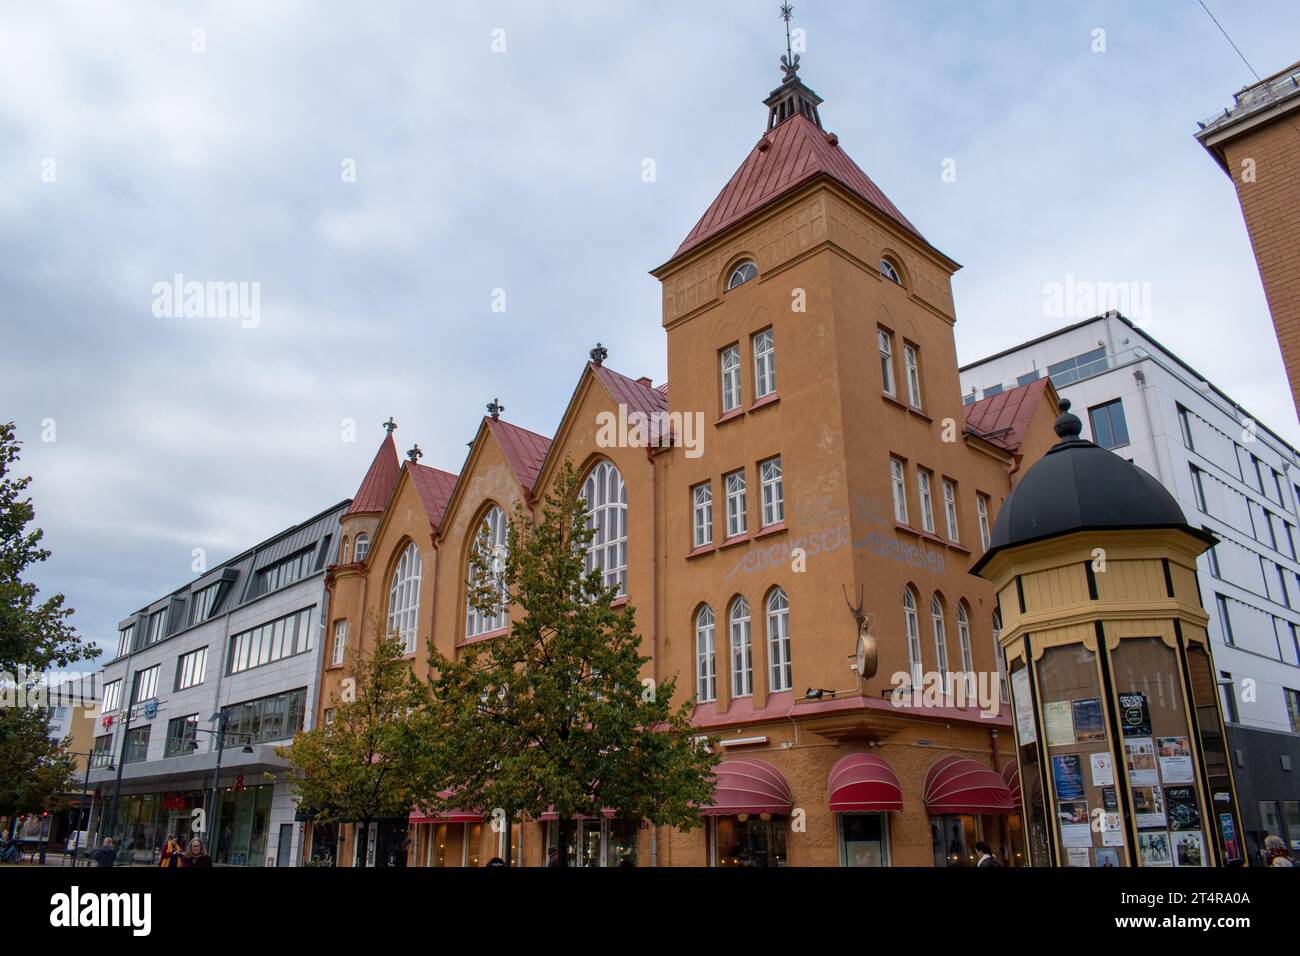 Lulea, Norrbotten, Sweden - October 6, 2023: The City center of Lulea, photographed on a cloudy autumn day. Stock Photo